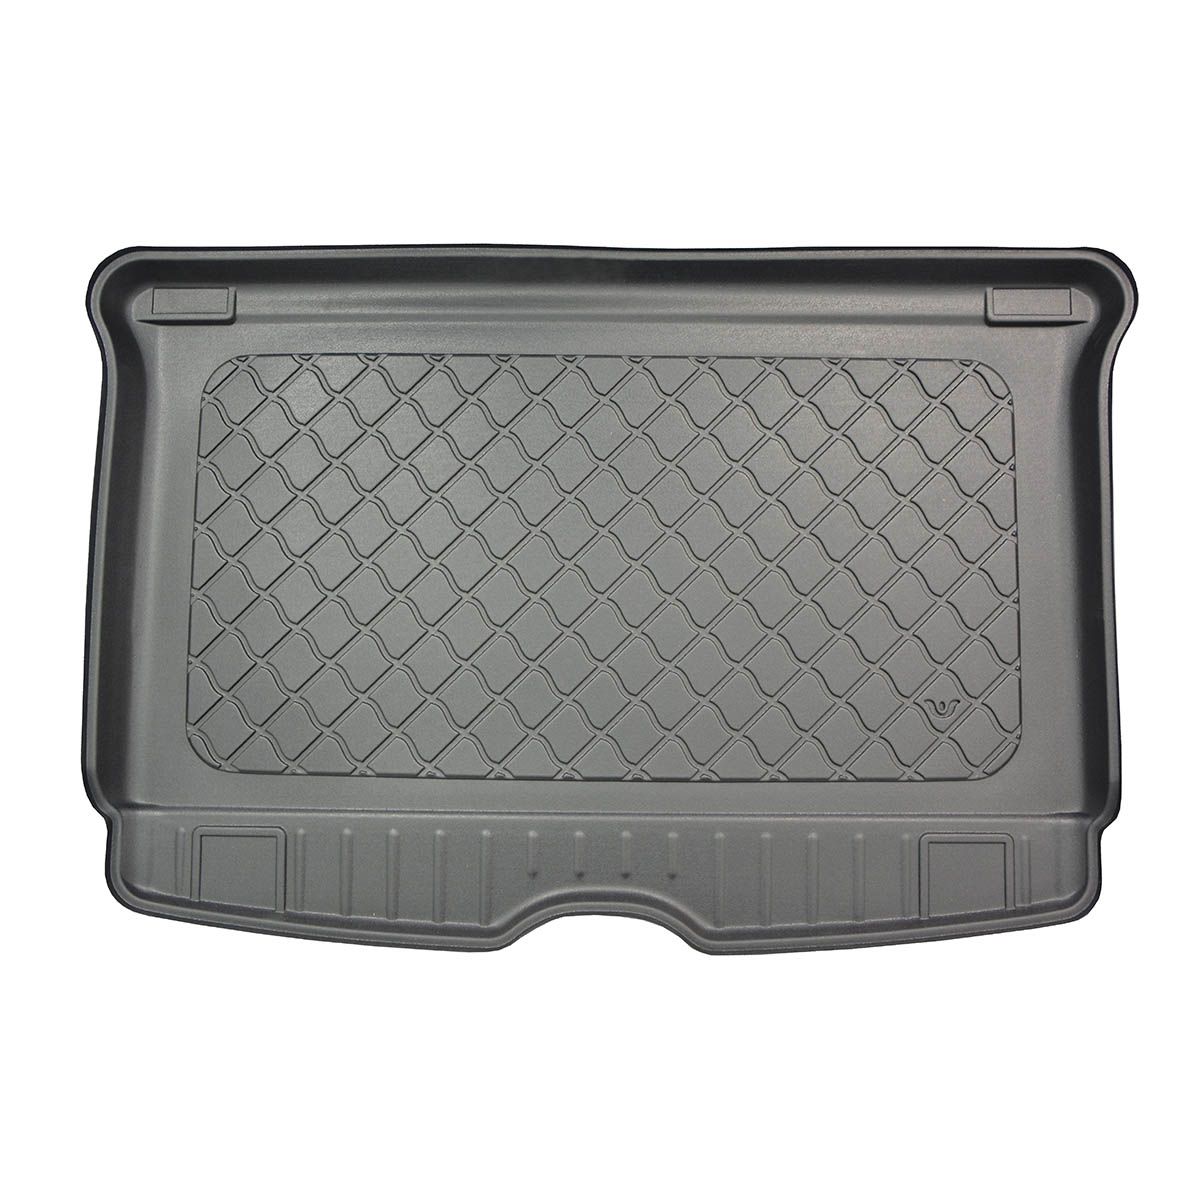 BMW i3 2013 onwards Moulded Boot Mat product image